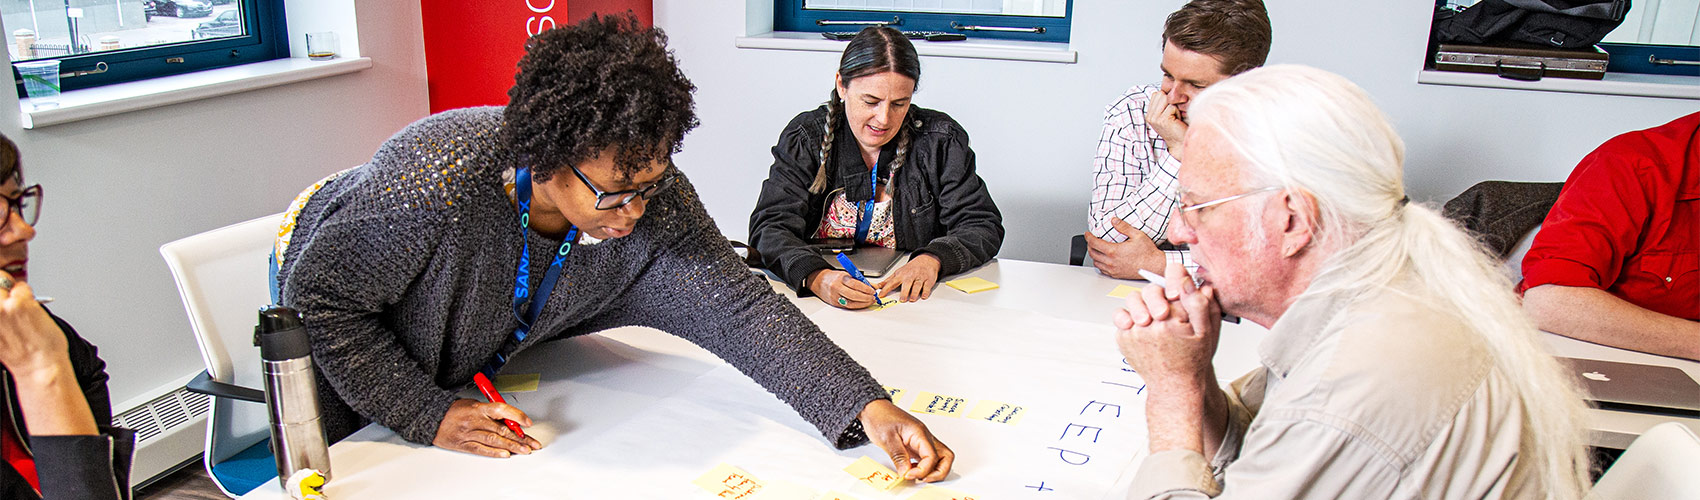 a group of people sitting around a table writing and placing sticky notes